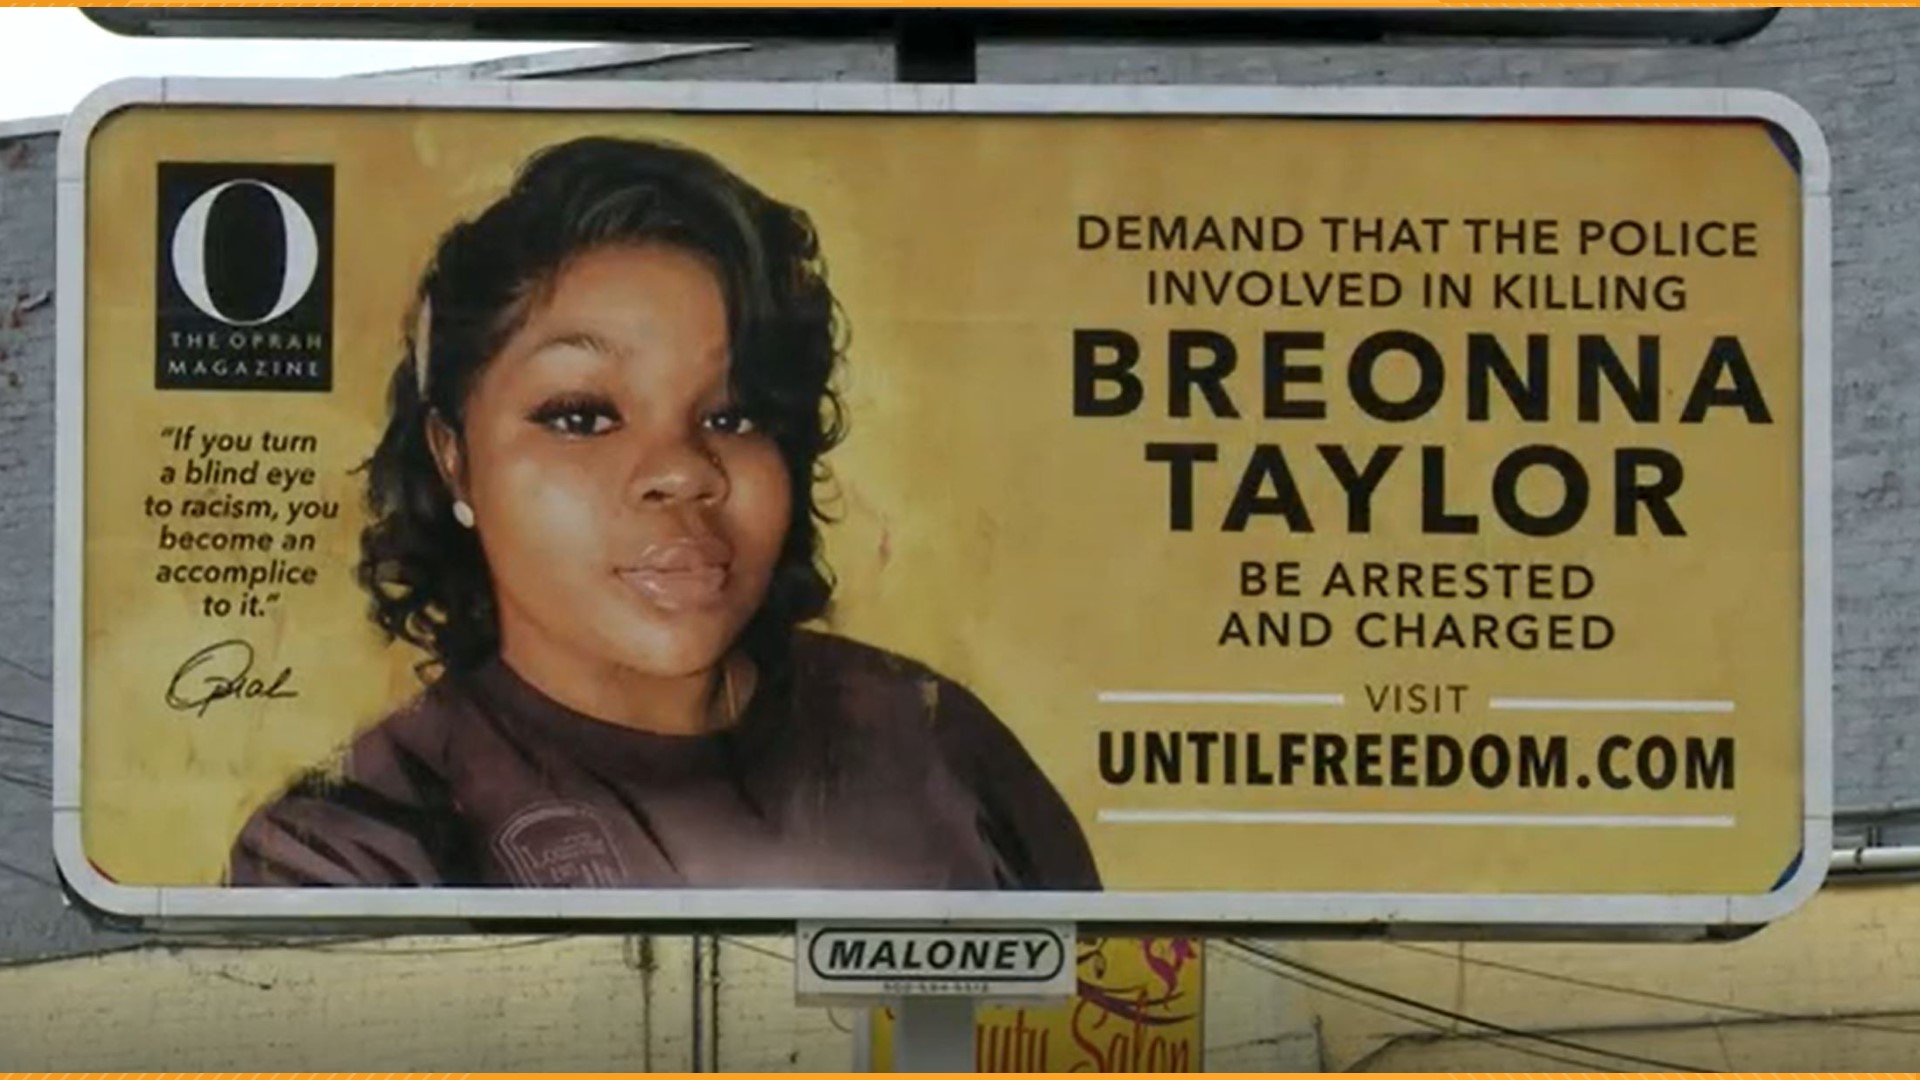 Until Freedom, a social justice group is sponsoring 26 billboards in Louisville demanding the arrest of the LMPD officers who killed Breonna Taylor.